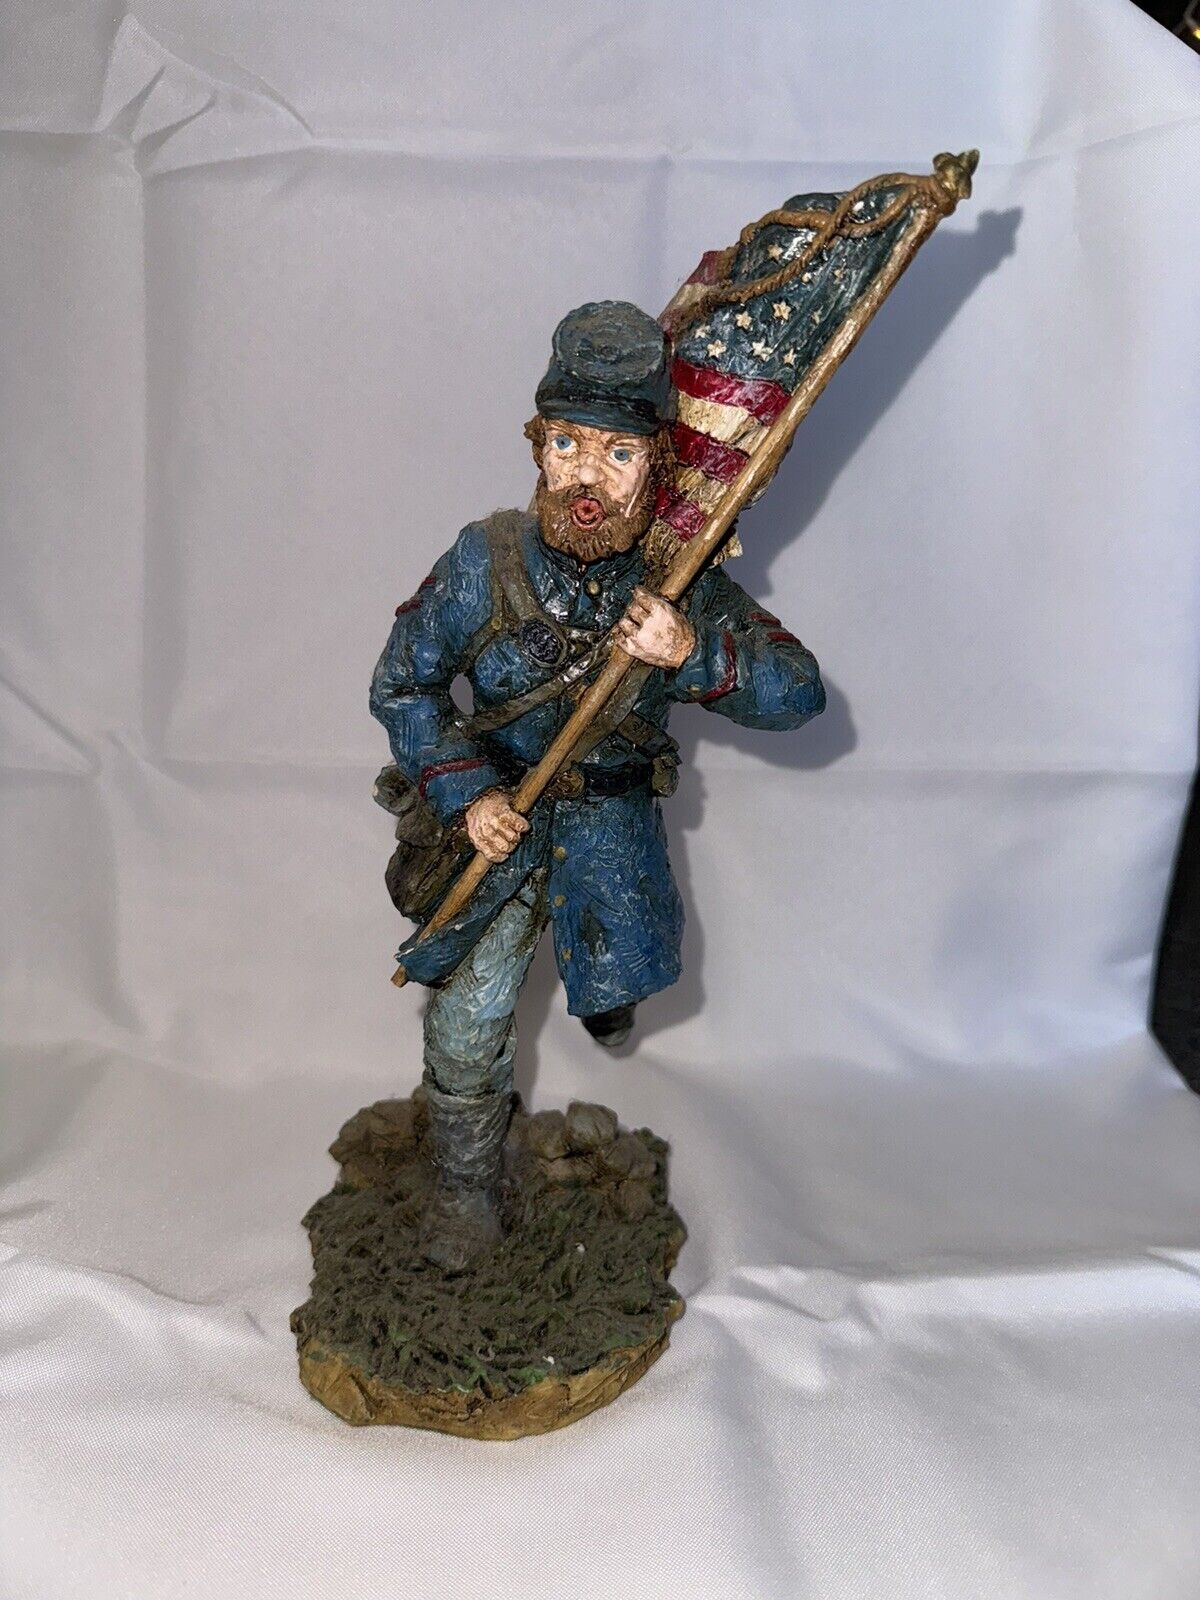 RARE American Civil War American With Flag Large Resin Figurine 12” by PPL 1995